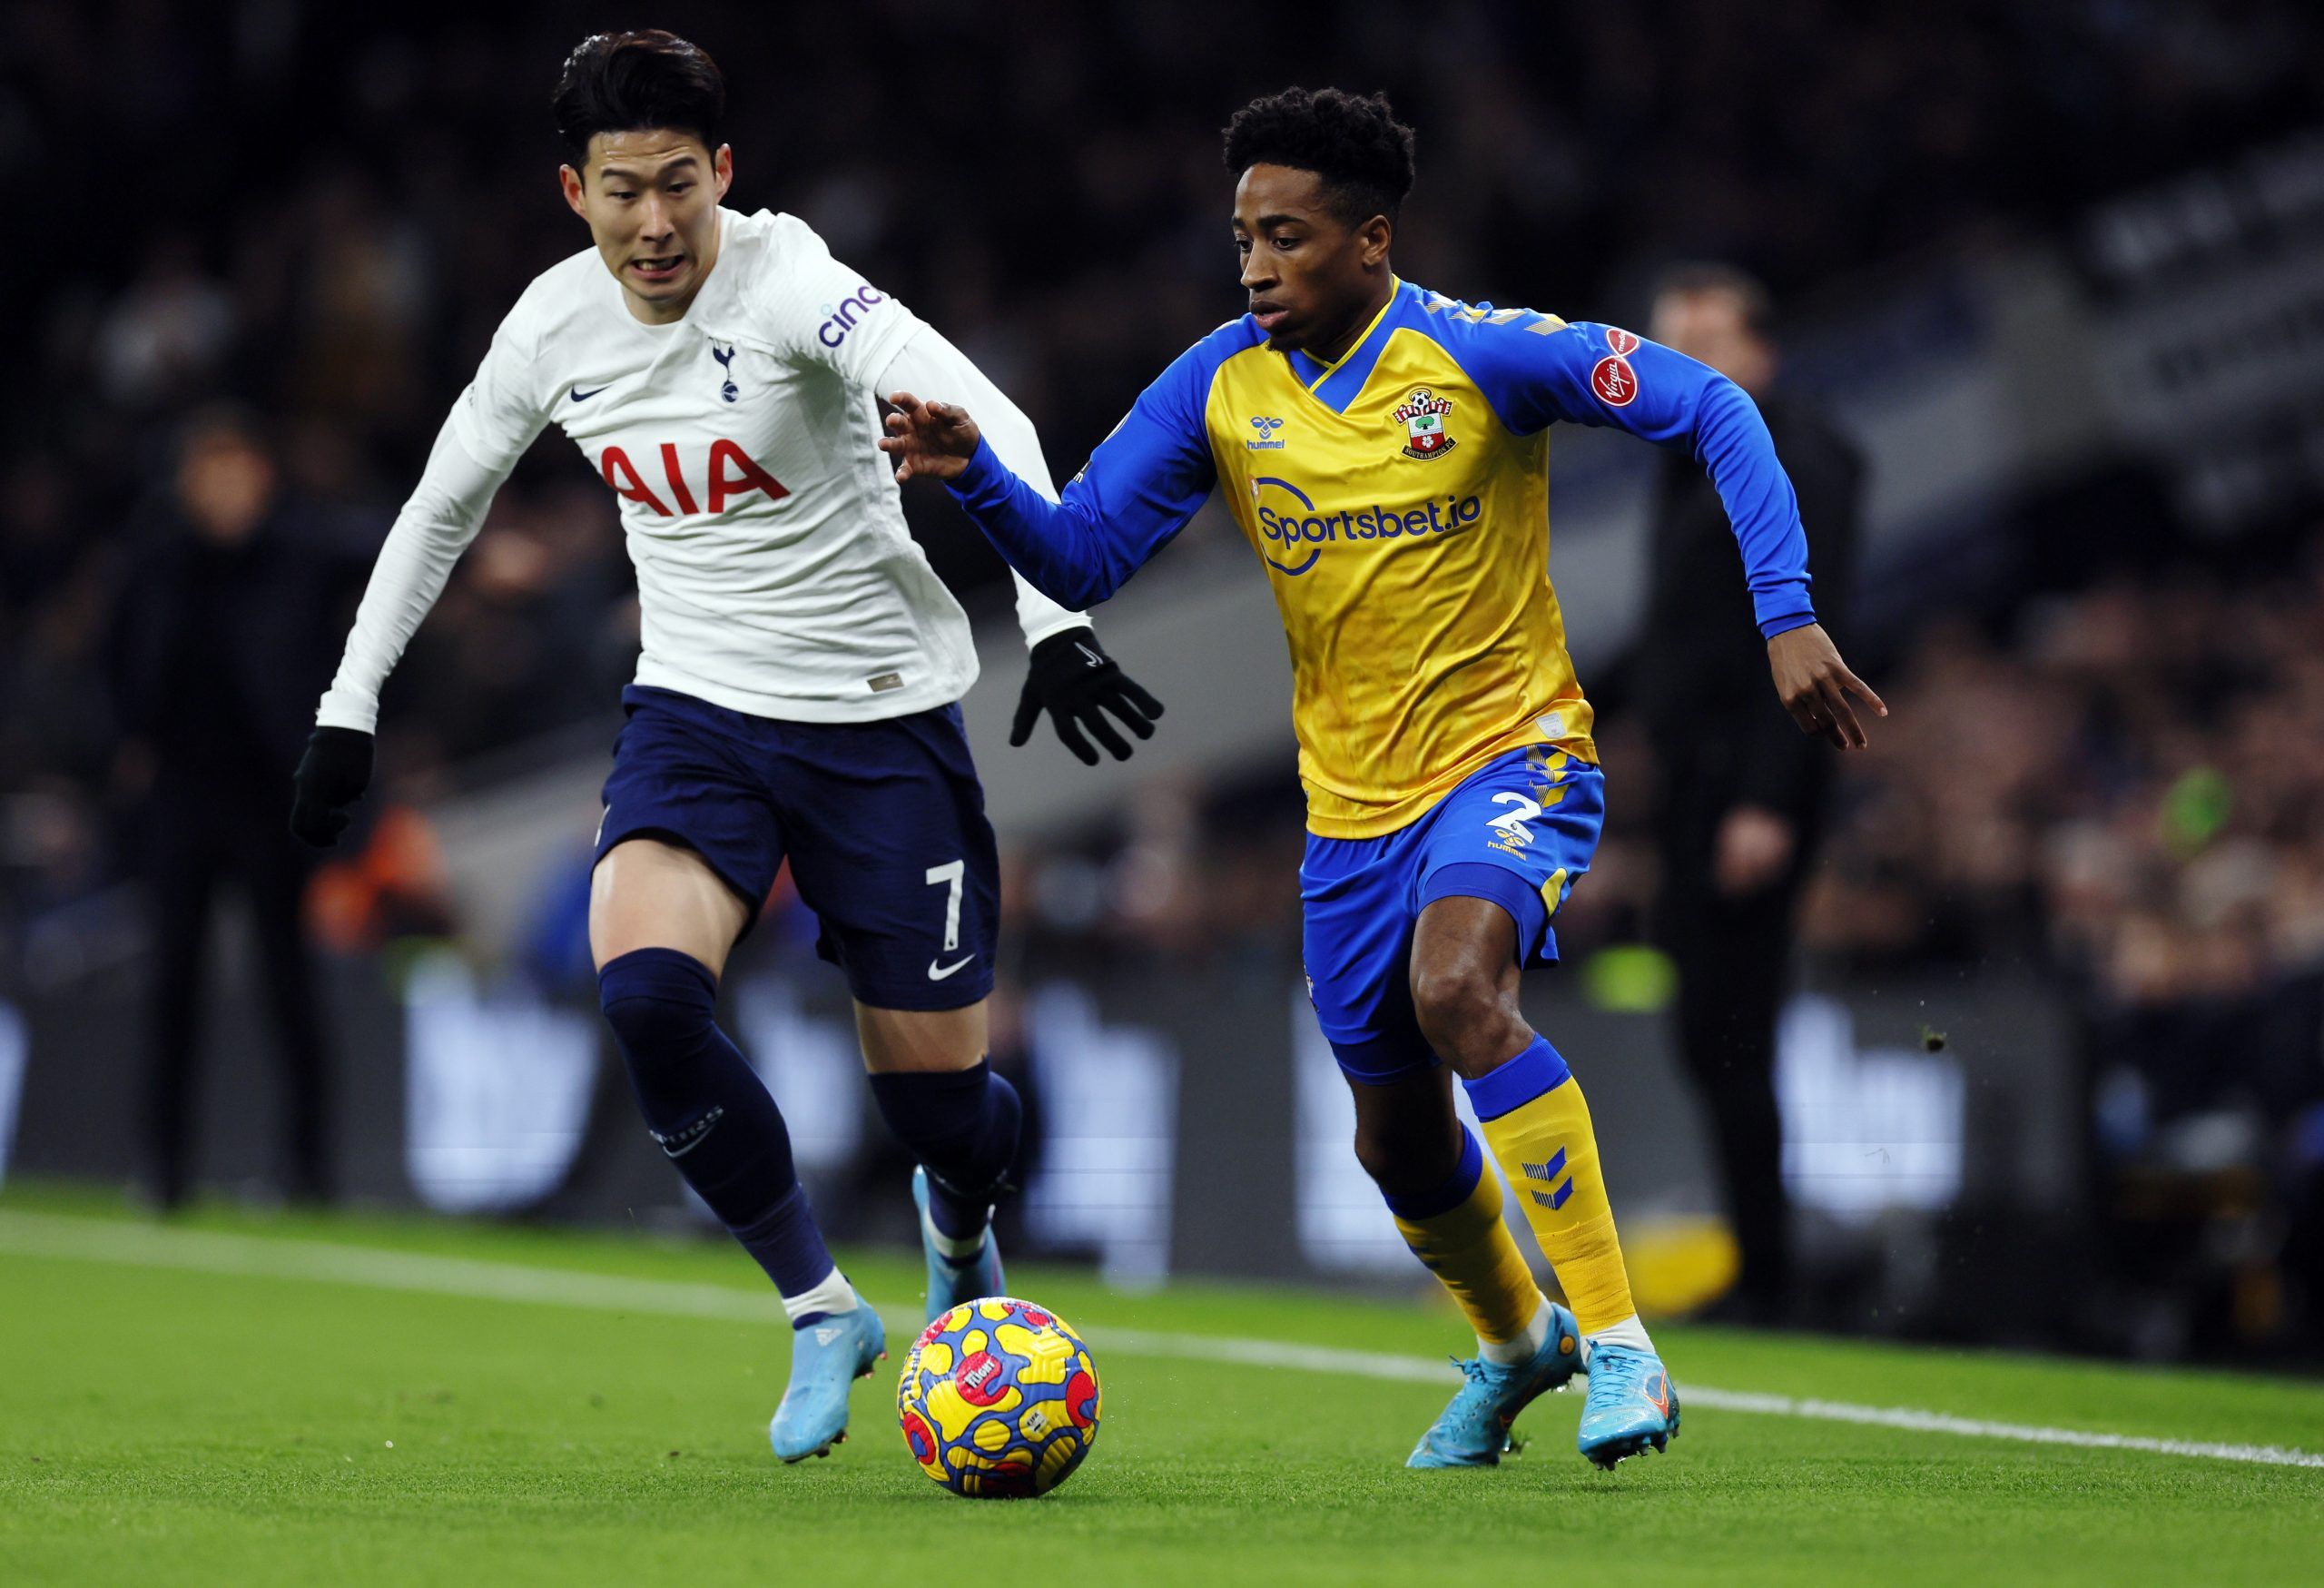 Tottenham Hotspur's Son Heung-min in action with Southampton's Kyle Walker-Peters